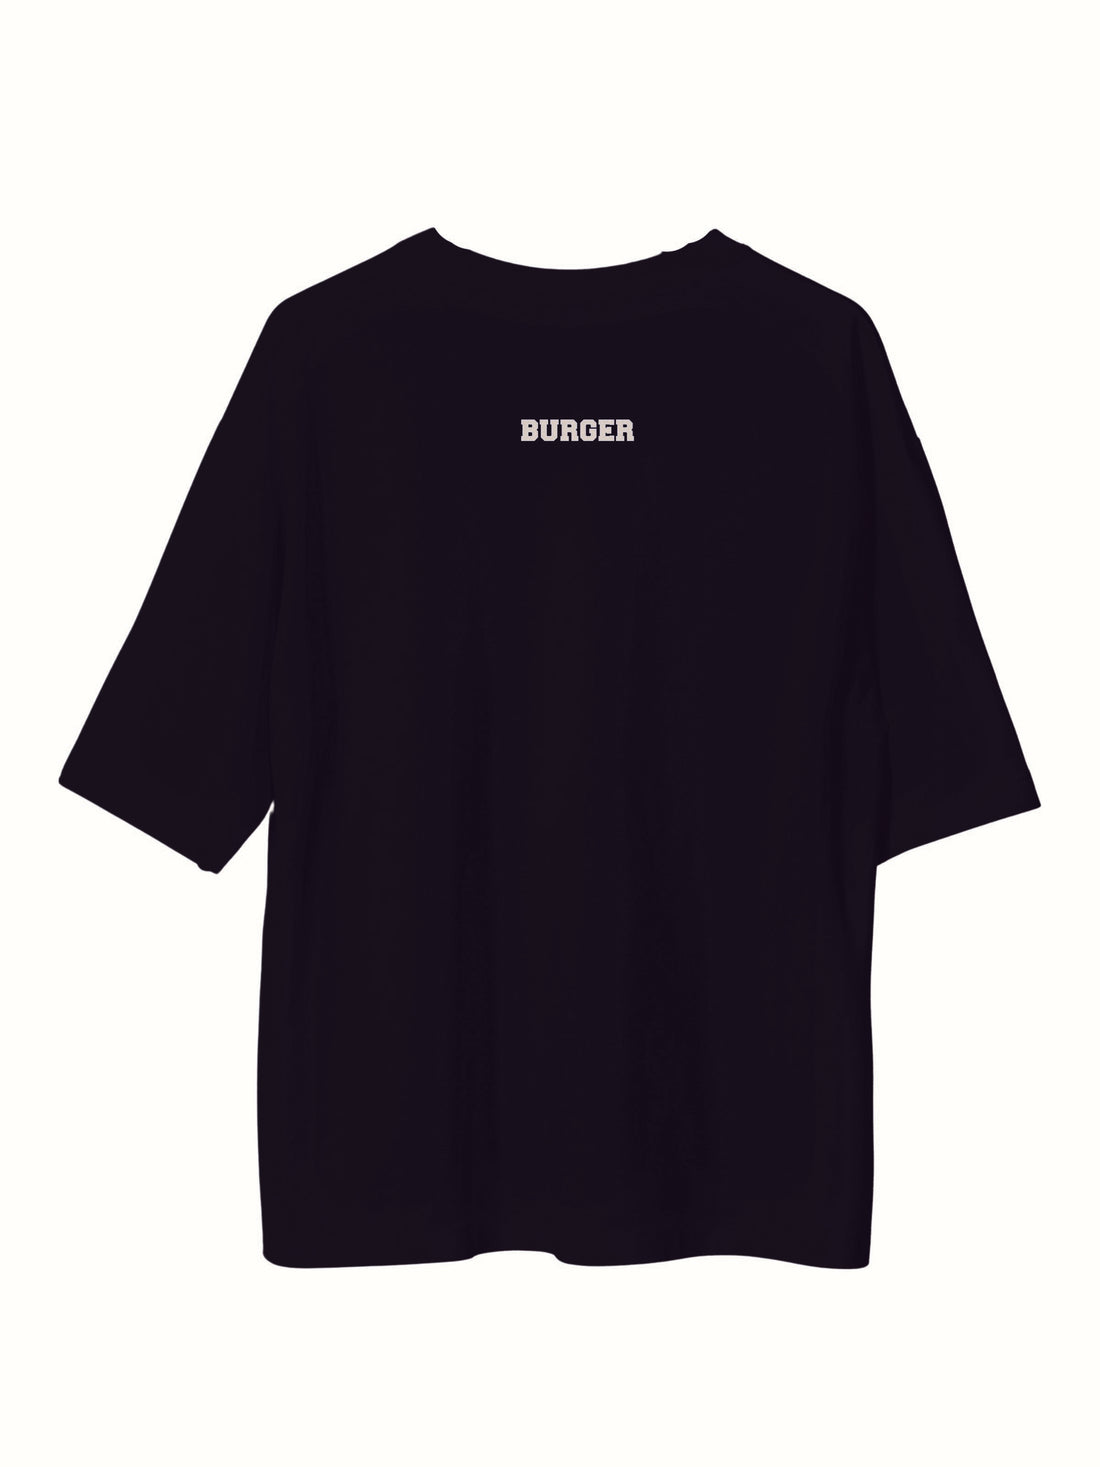 How Much Techno (Reflective) - Burger Bae Oversized  Tee For Men and Women